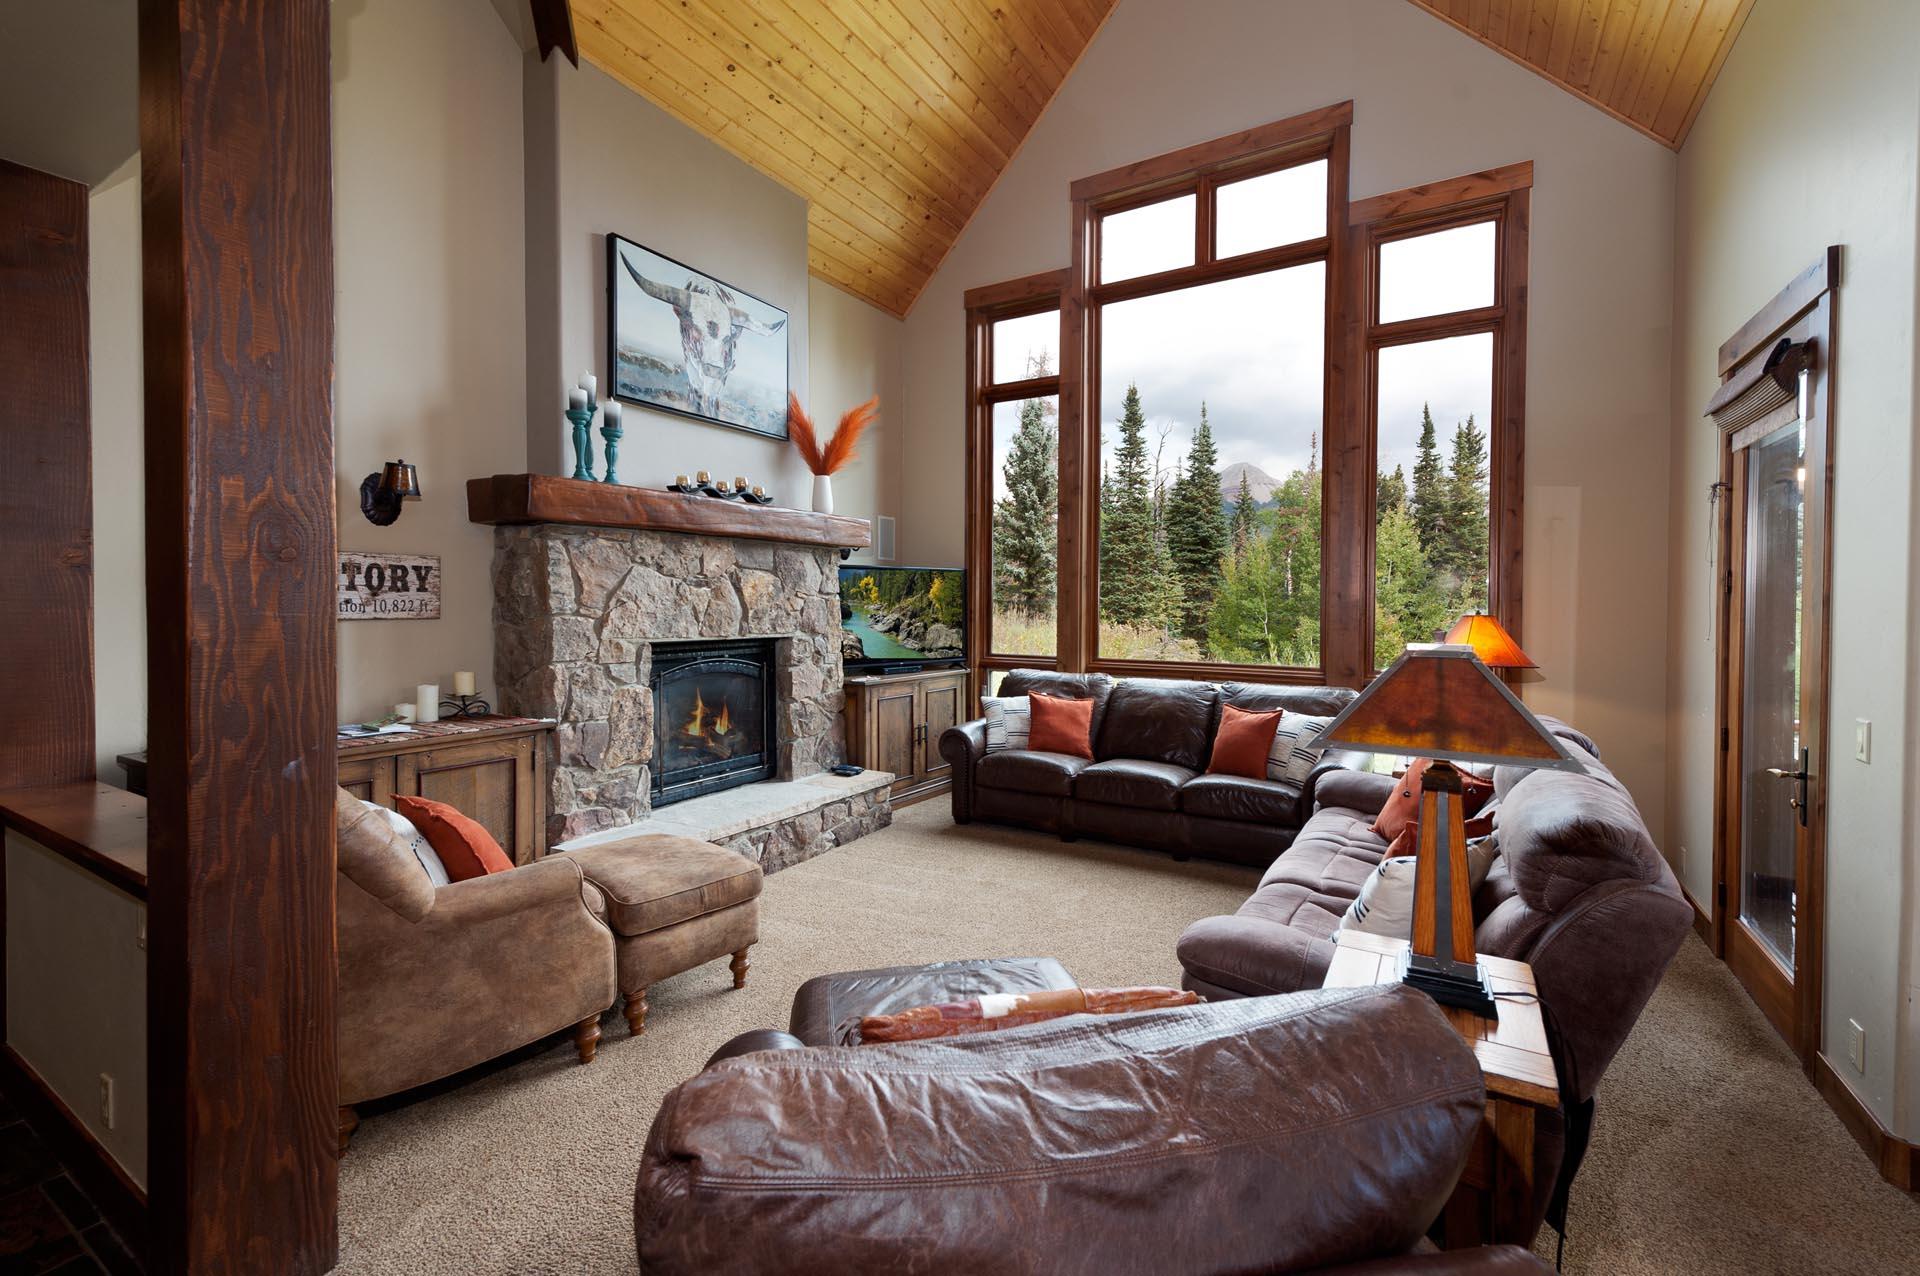 Beautiful vacation rental located just across the street from Purgatory Resort in Durango, CO. Living room with Engineer Mountain views and fireplace.